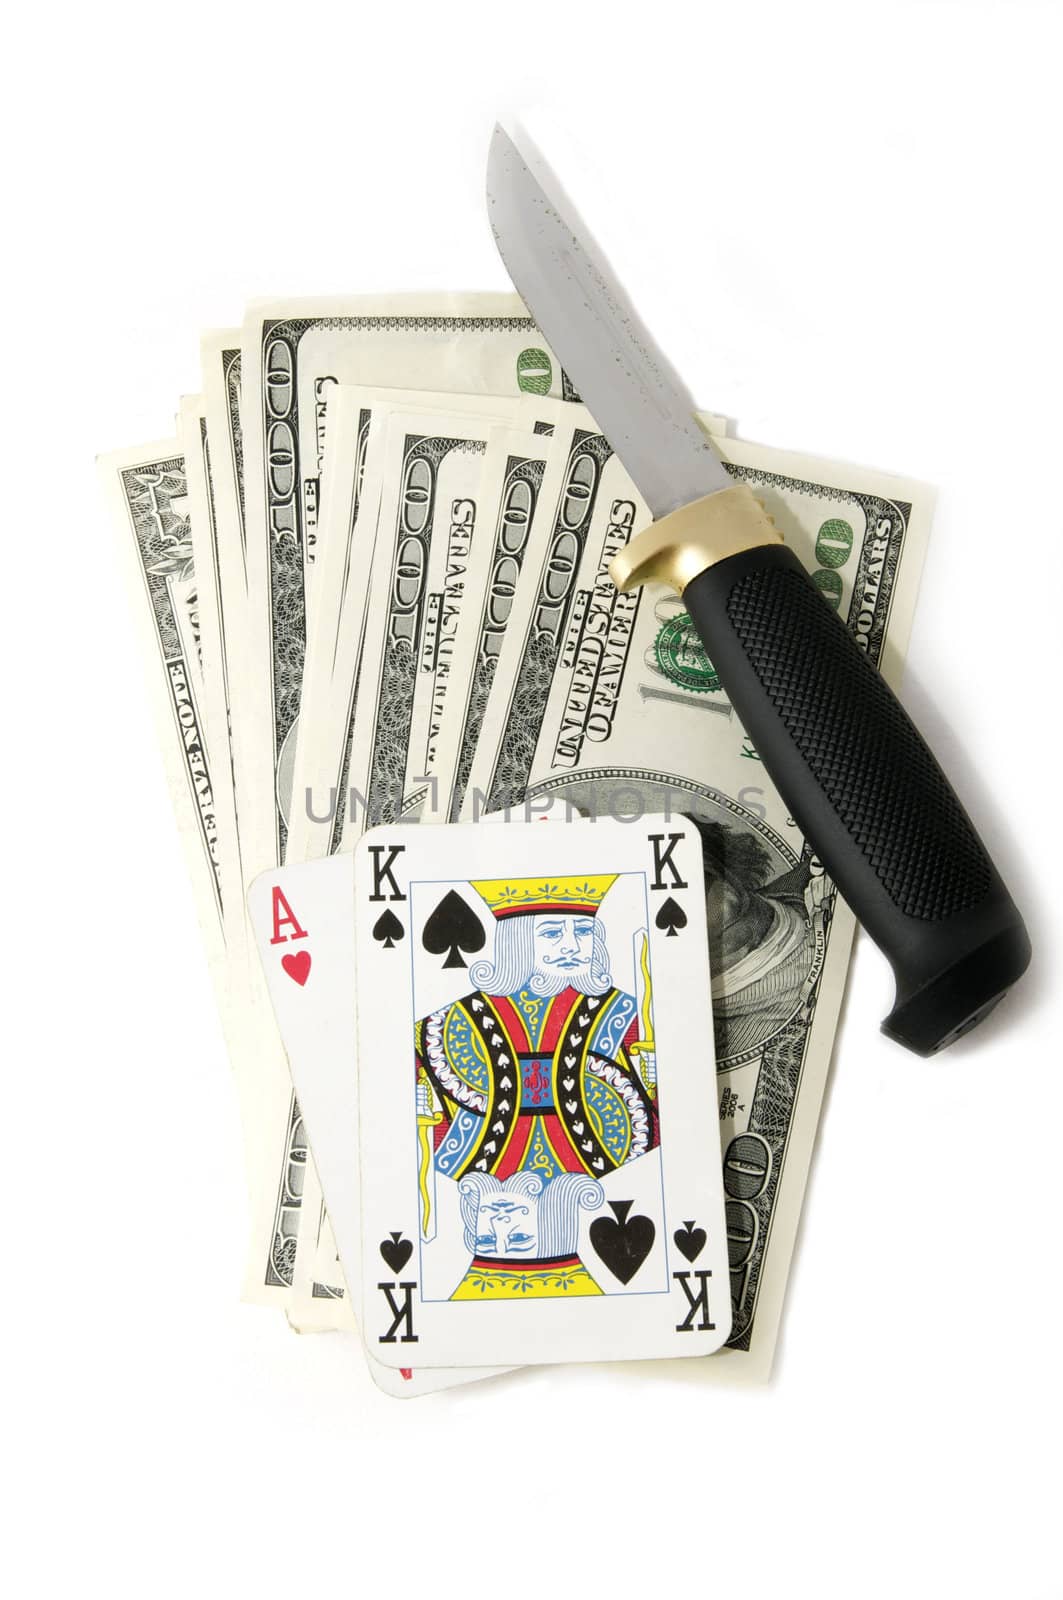 money card knife composition on white background